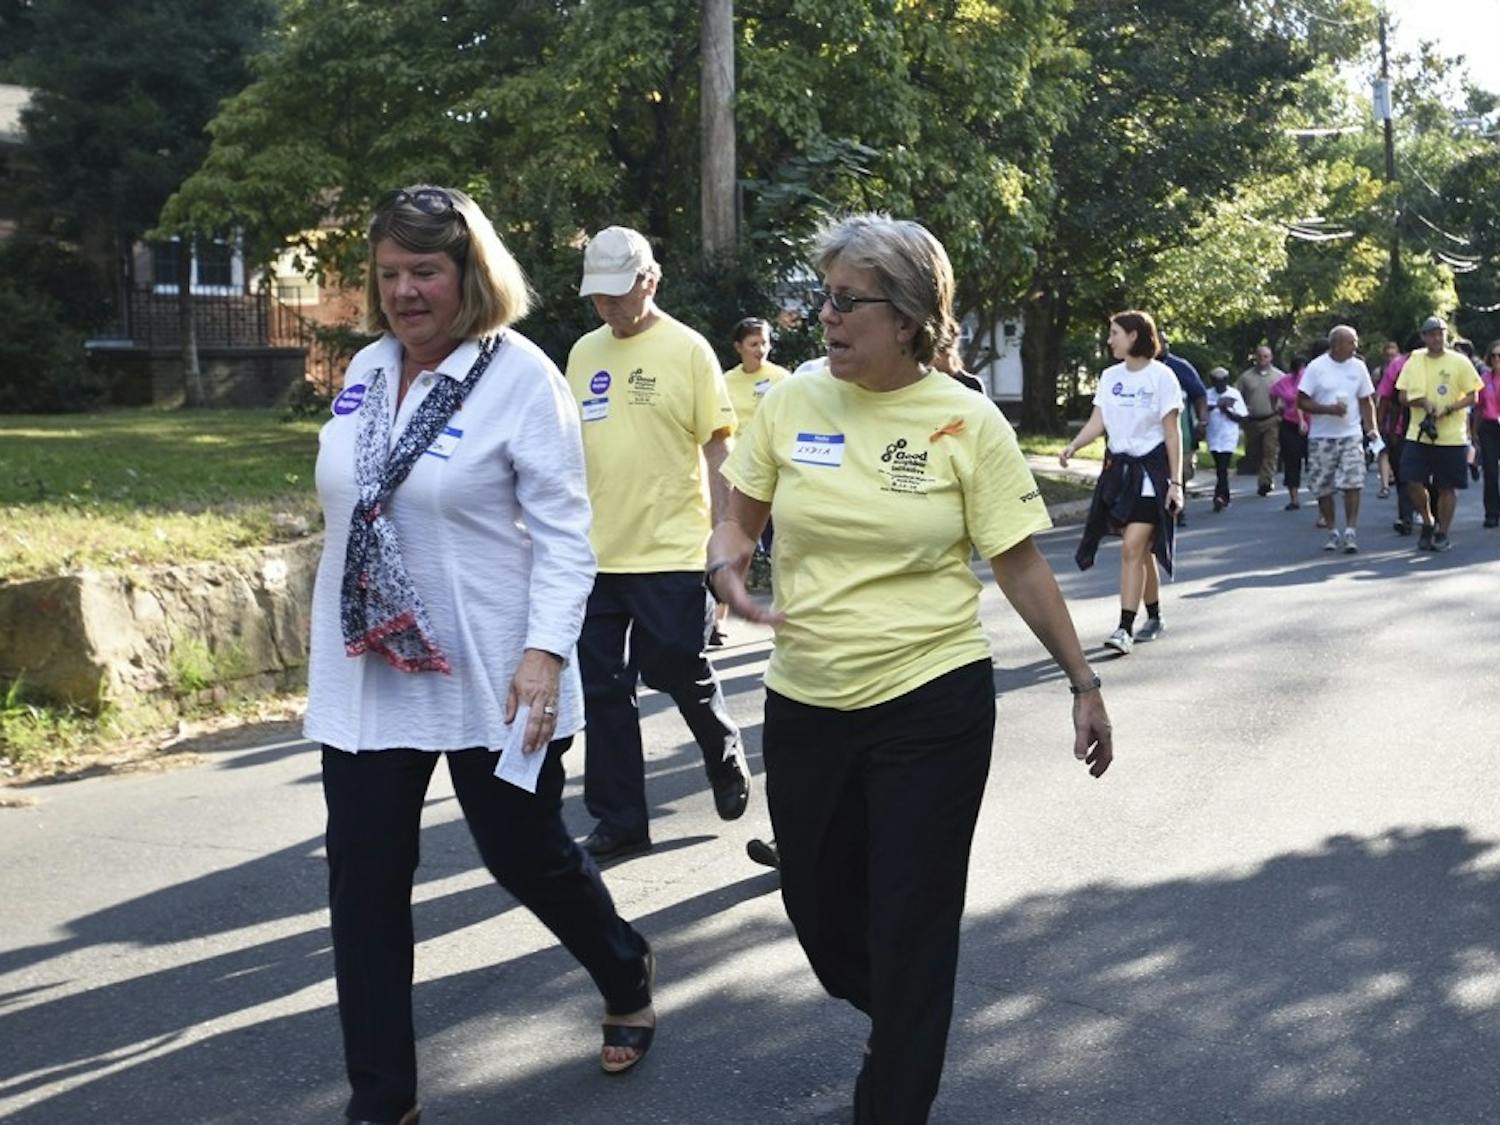 Mayor of Chapel Hill, Pam Hemminger and Mayor of Carrboro, Lydia Lavelle lead a walk around the neighborhood at the good neighbor block party at Hargraves Community Center in Aug. 2016.

